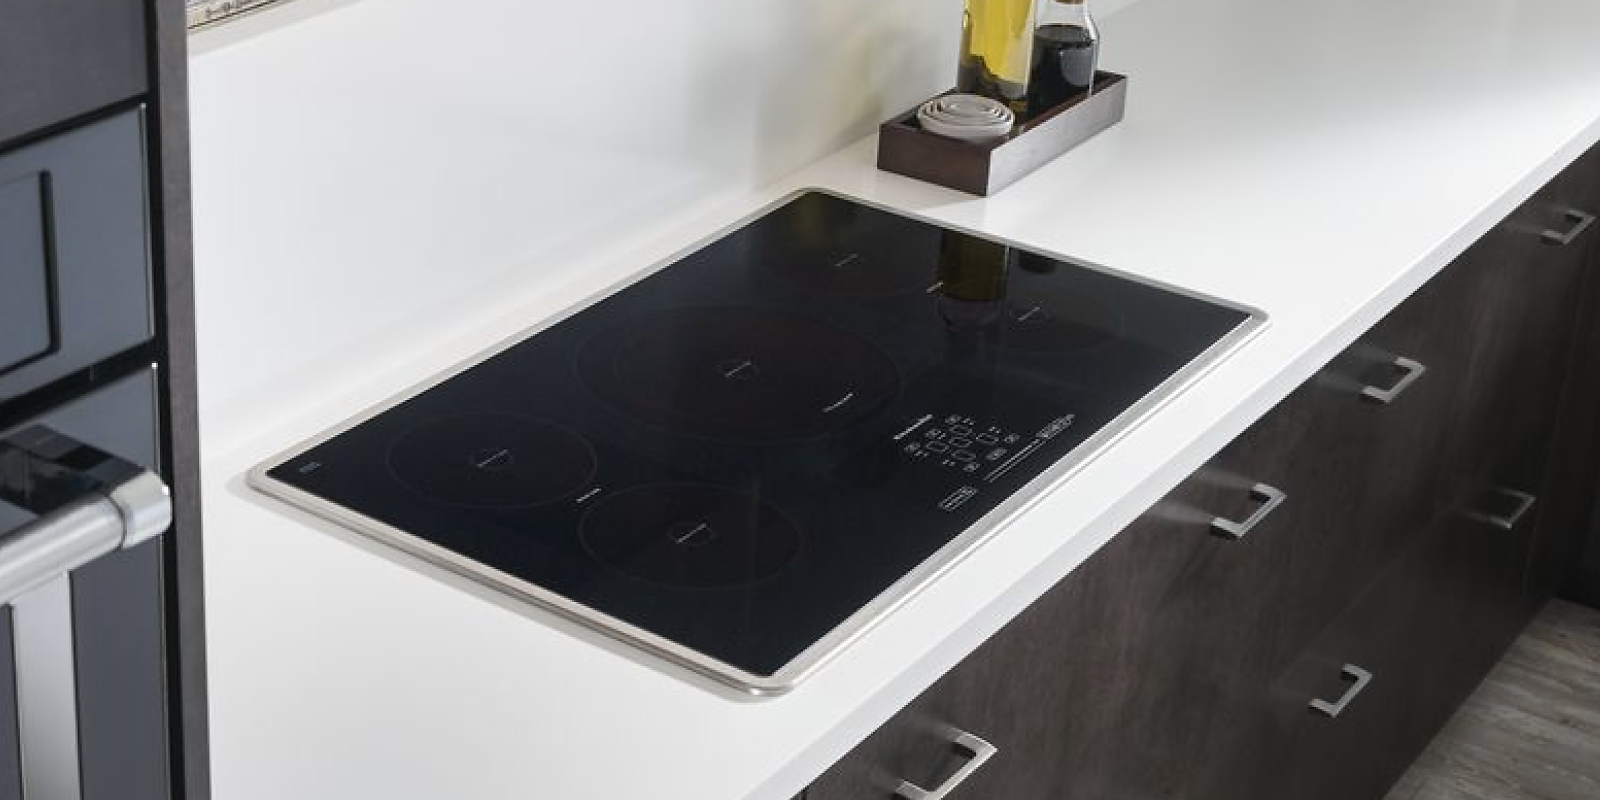 A black KitchenAid® induction cooktop installed in a white countertop.